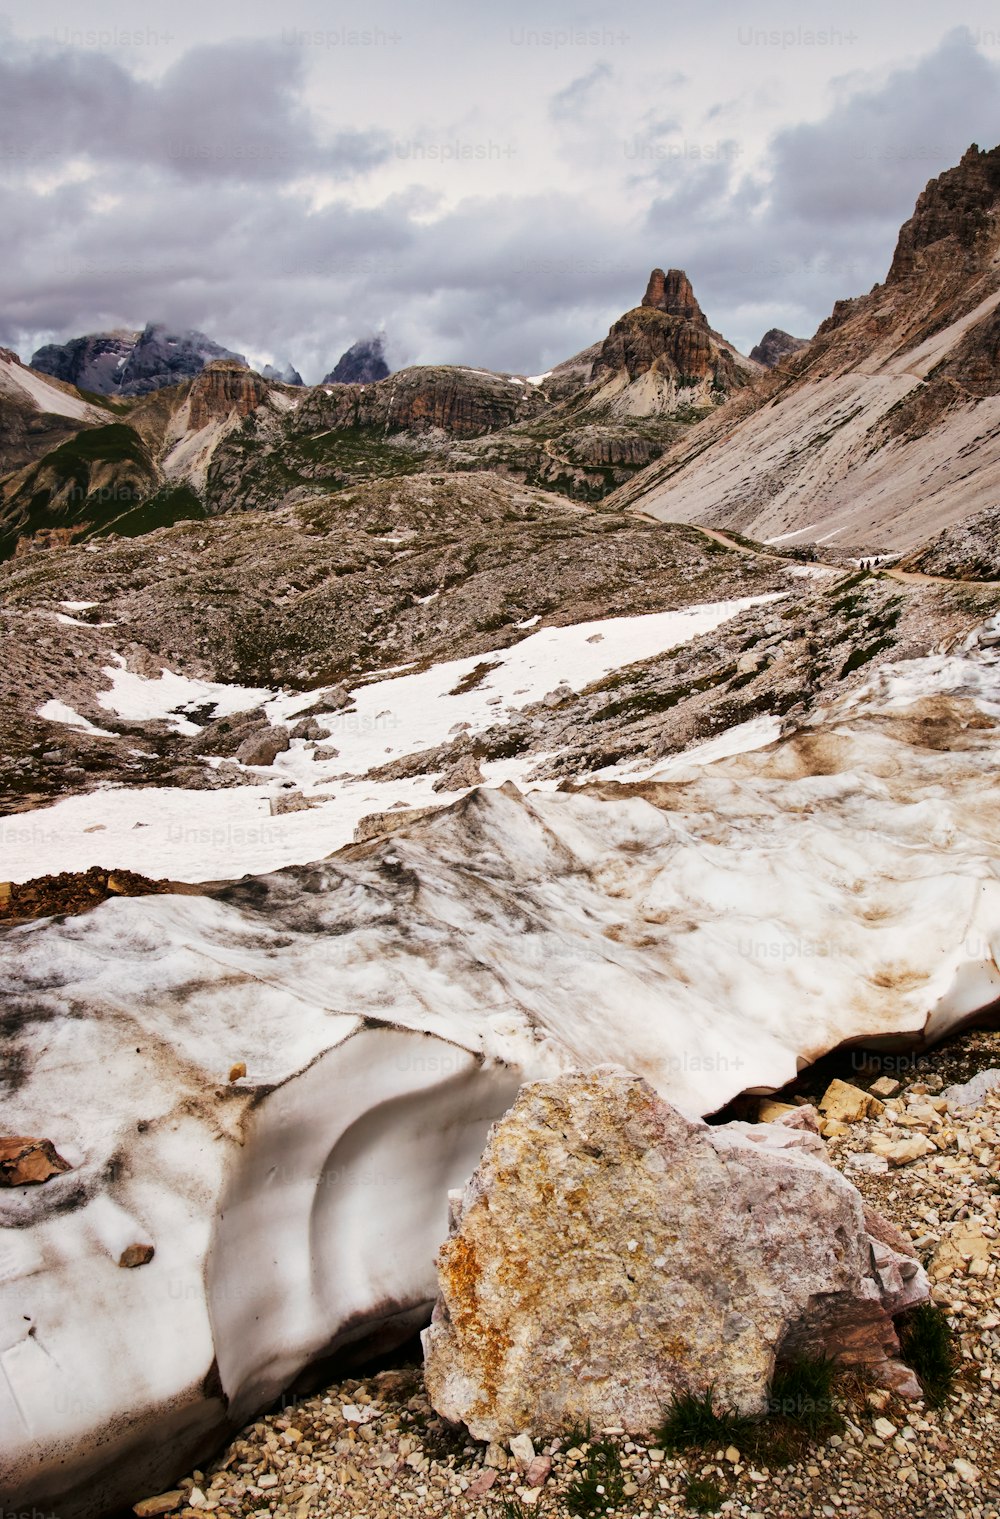 a mountain landscape with snow on the ground and rocks on the ground